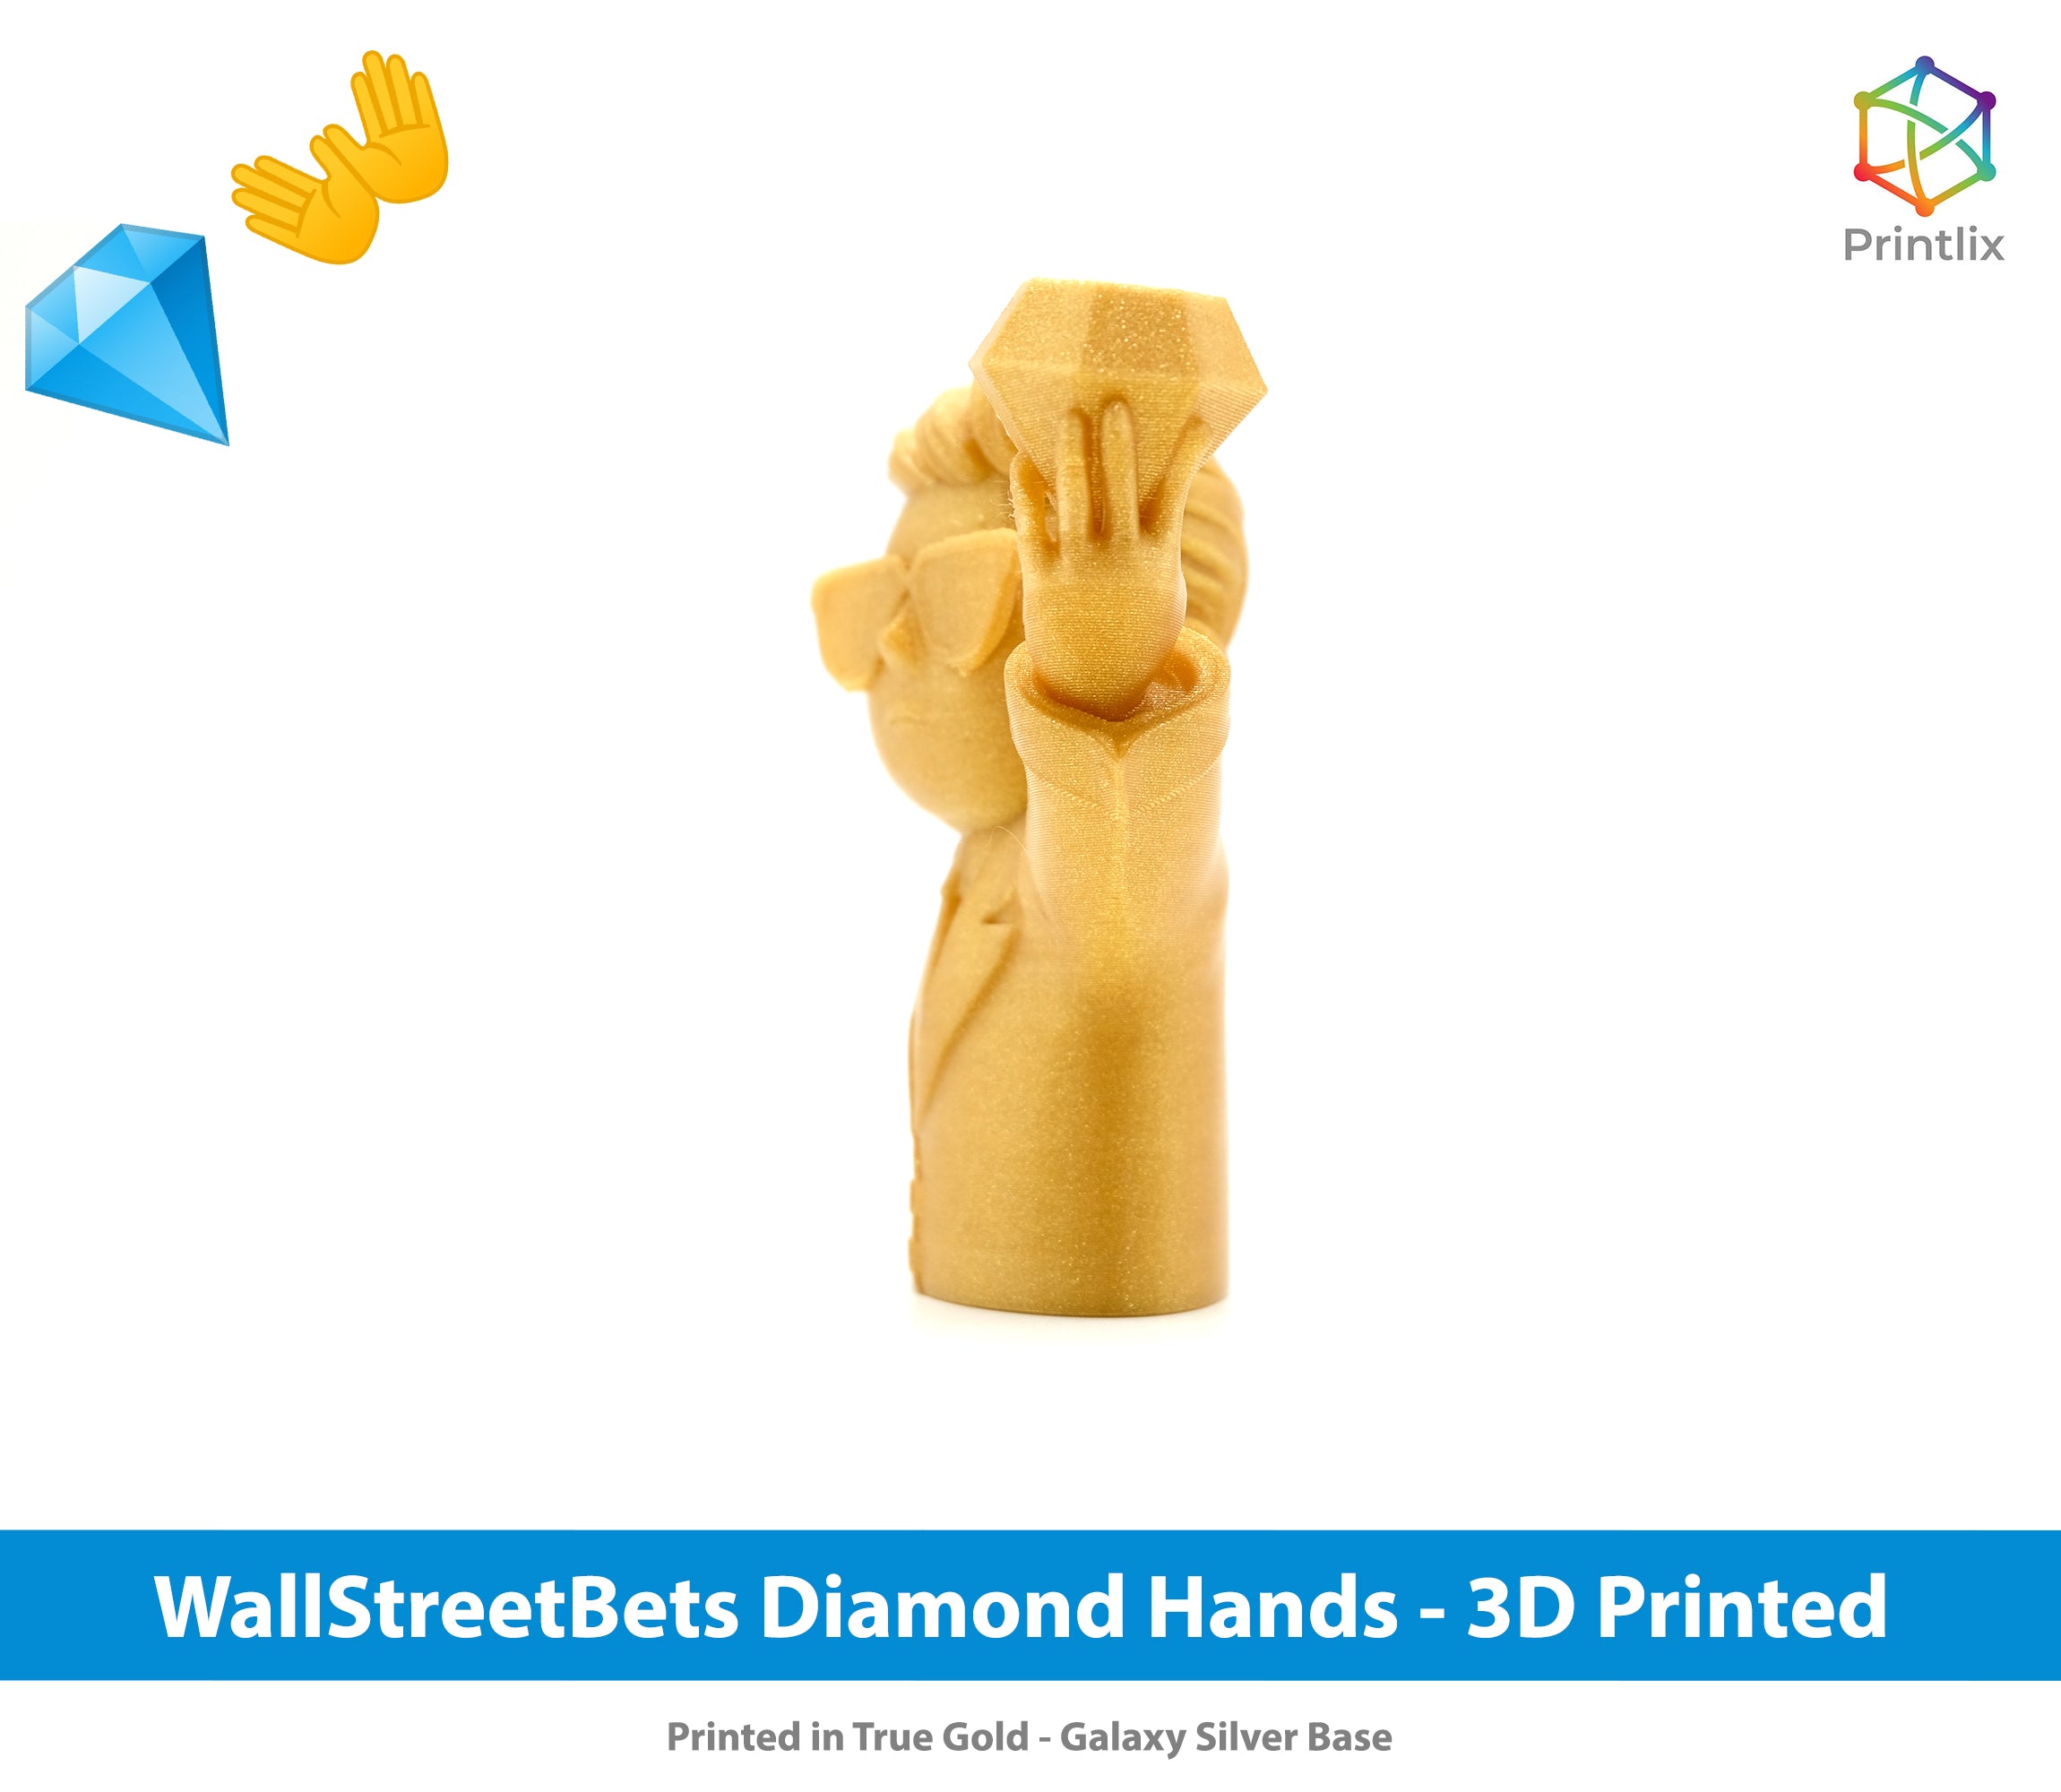 WallStreetBets Diamond Hands Figure - Apes Together Strong/Stonks Base -- 3D Printed